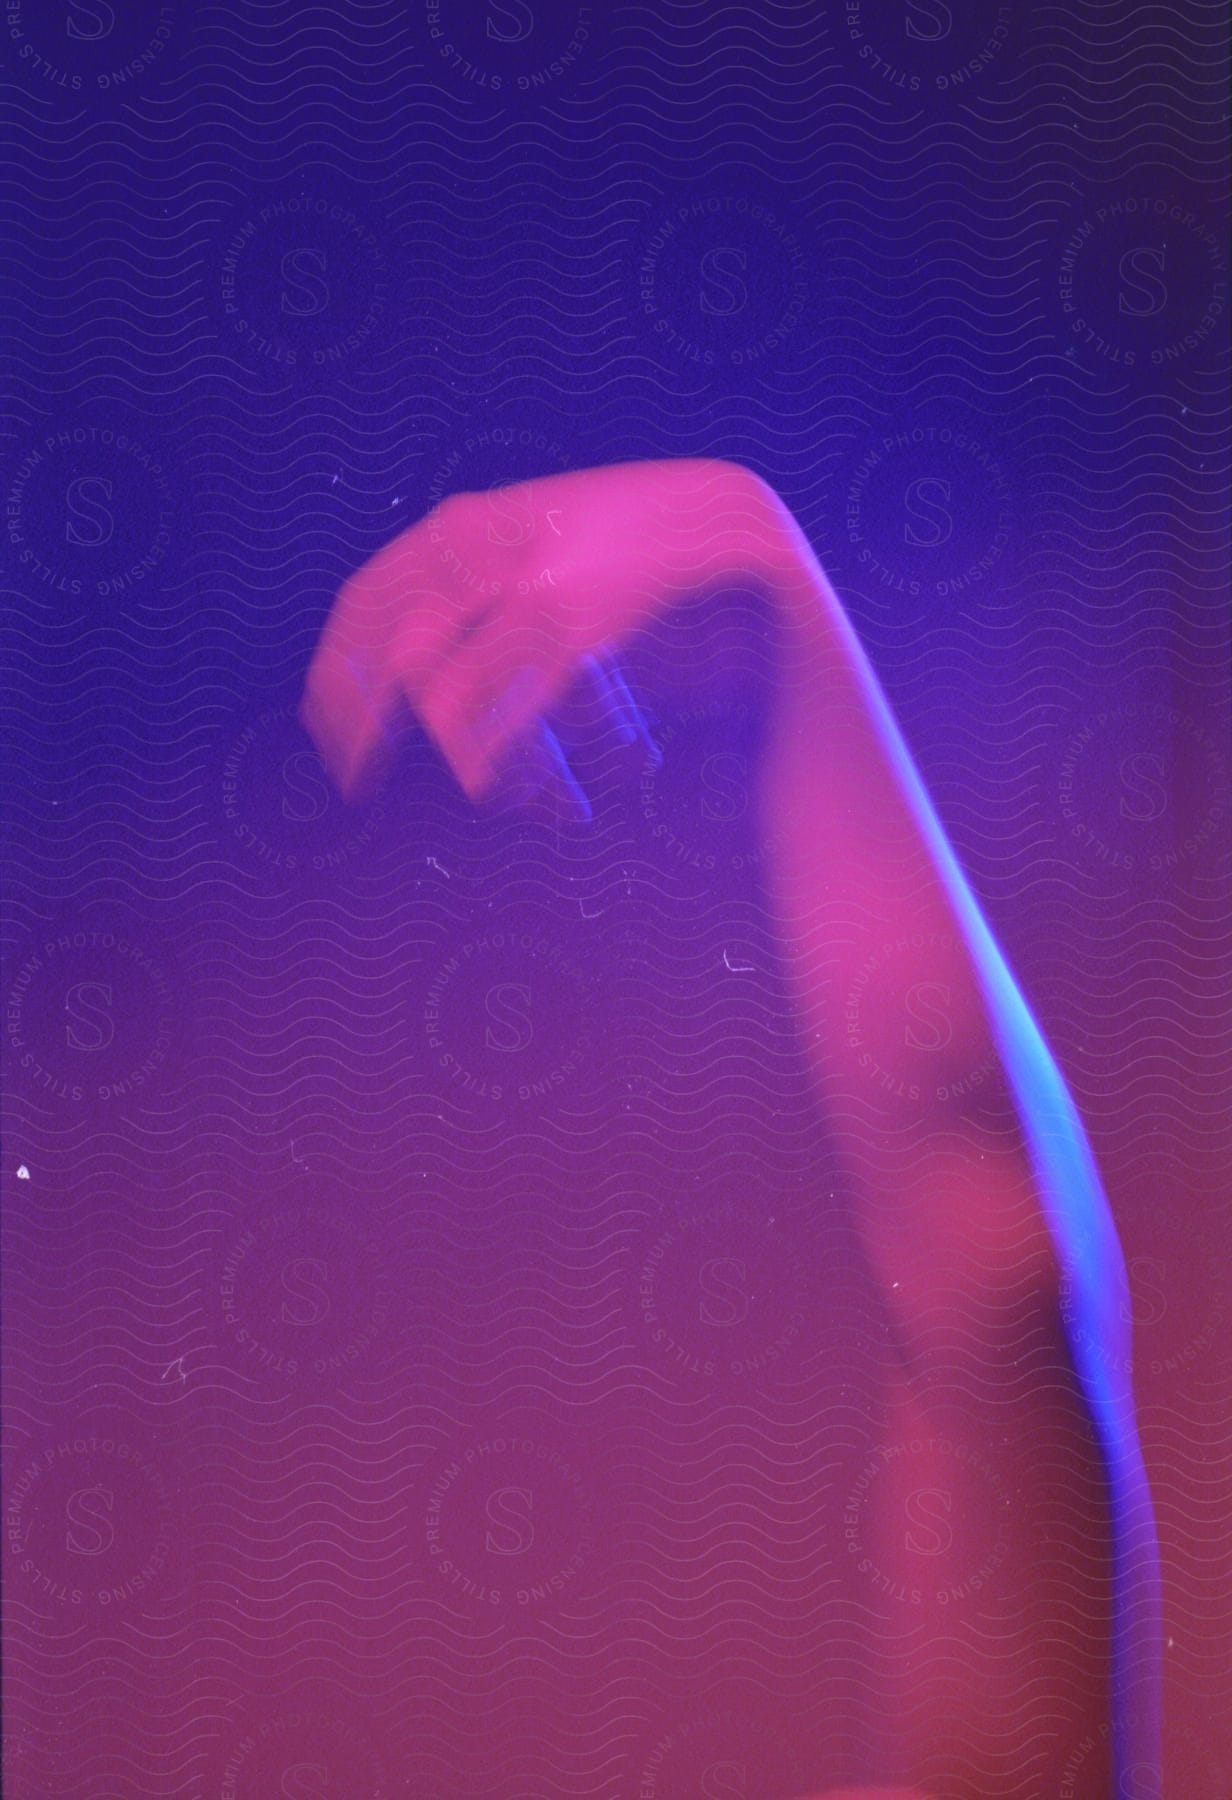 An arm moving in blue and purple light